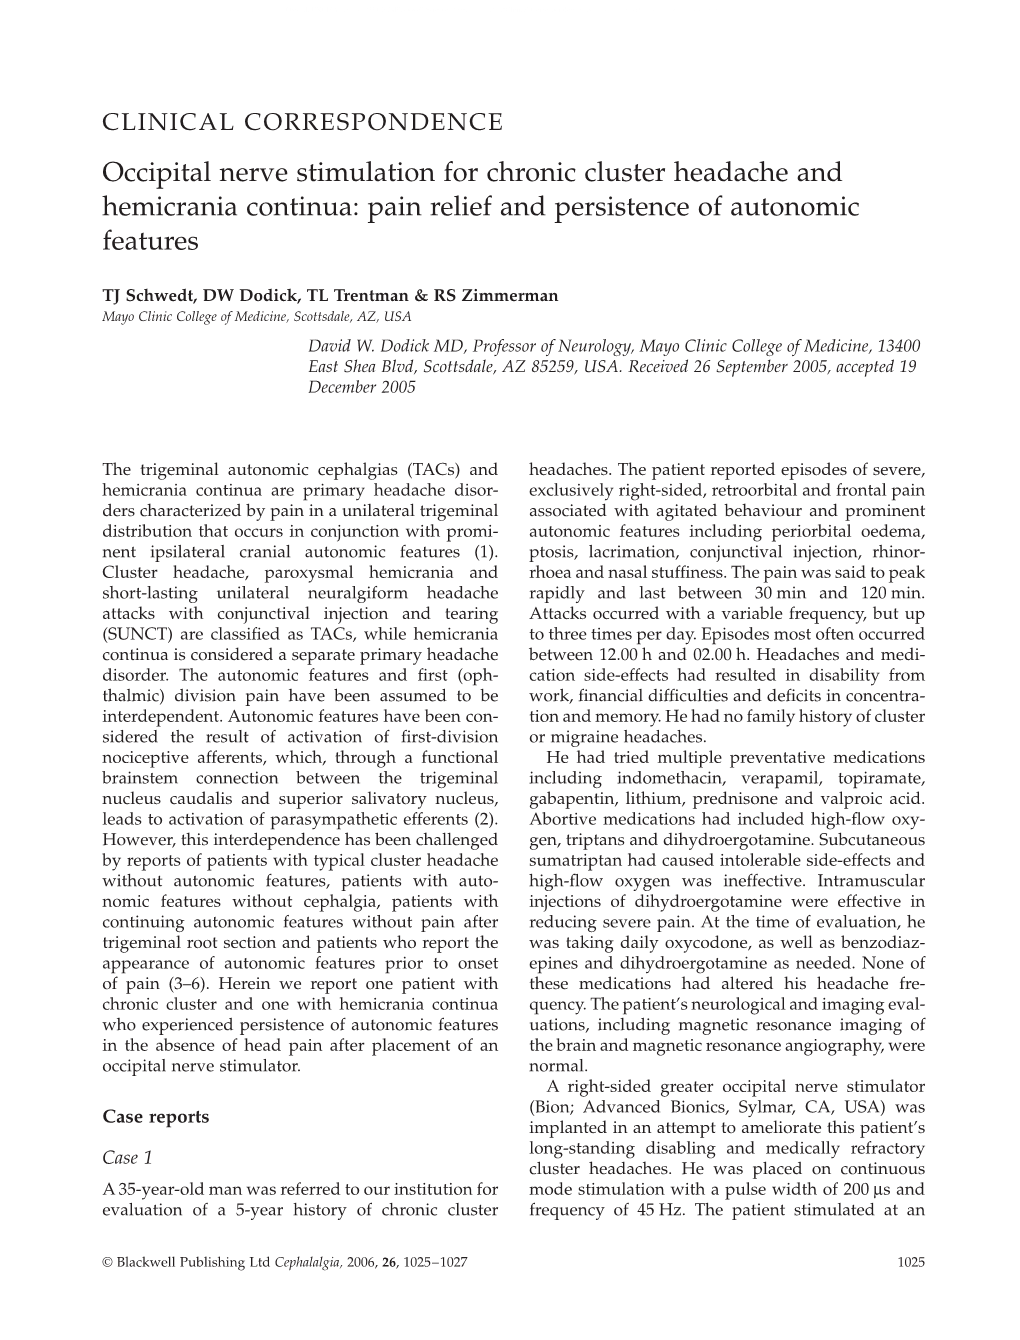 Occipital Nerve Stimulation for Chronic Cluster Headache and Hemicrania Continua: Pain Relief and Persistence of Autonomic Features